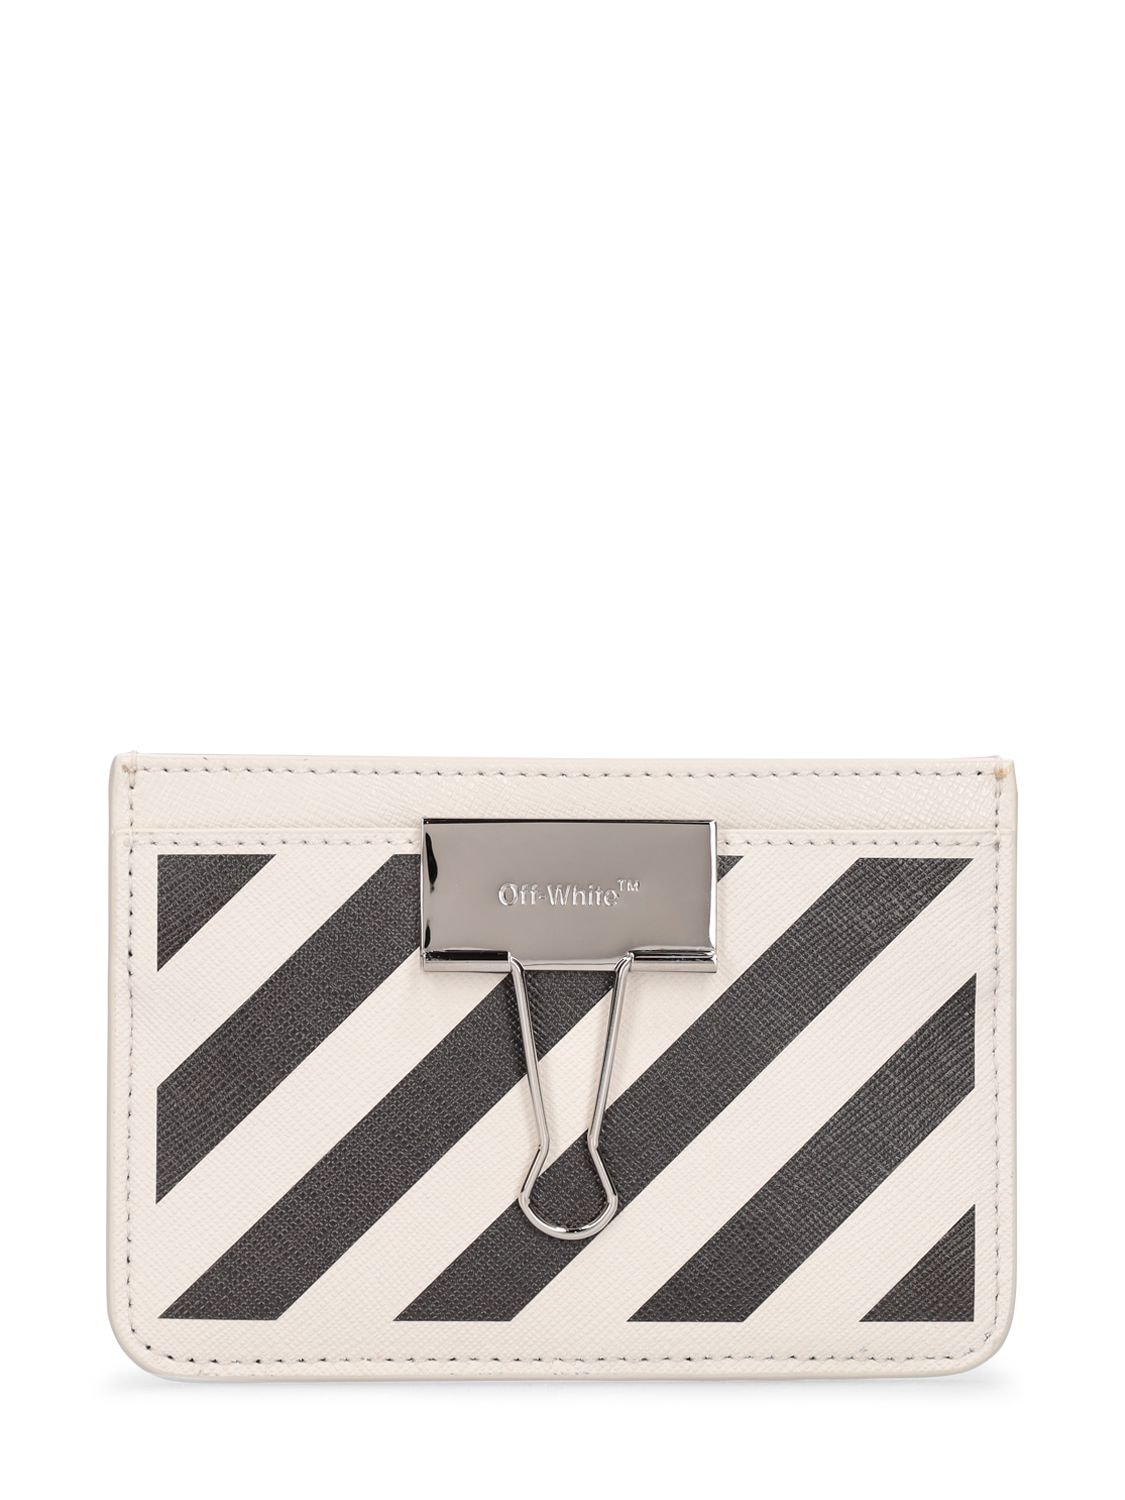 OFF-WHITE BINDER SIMPLE LEATHER CARD HOLDER